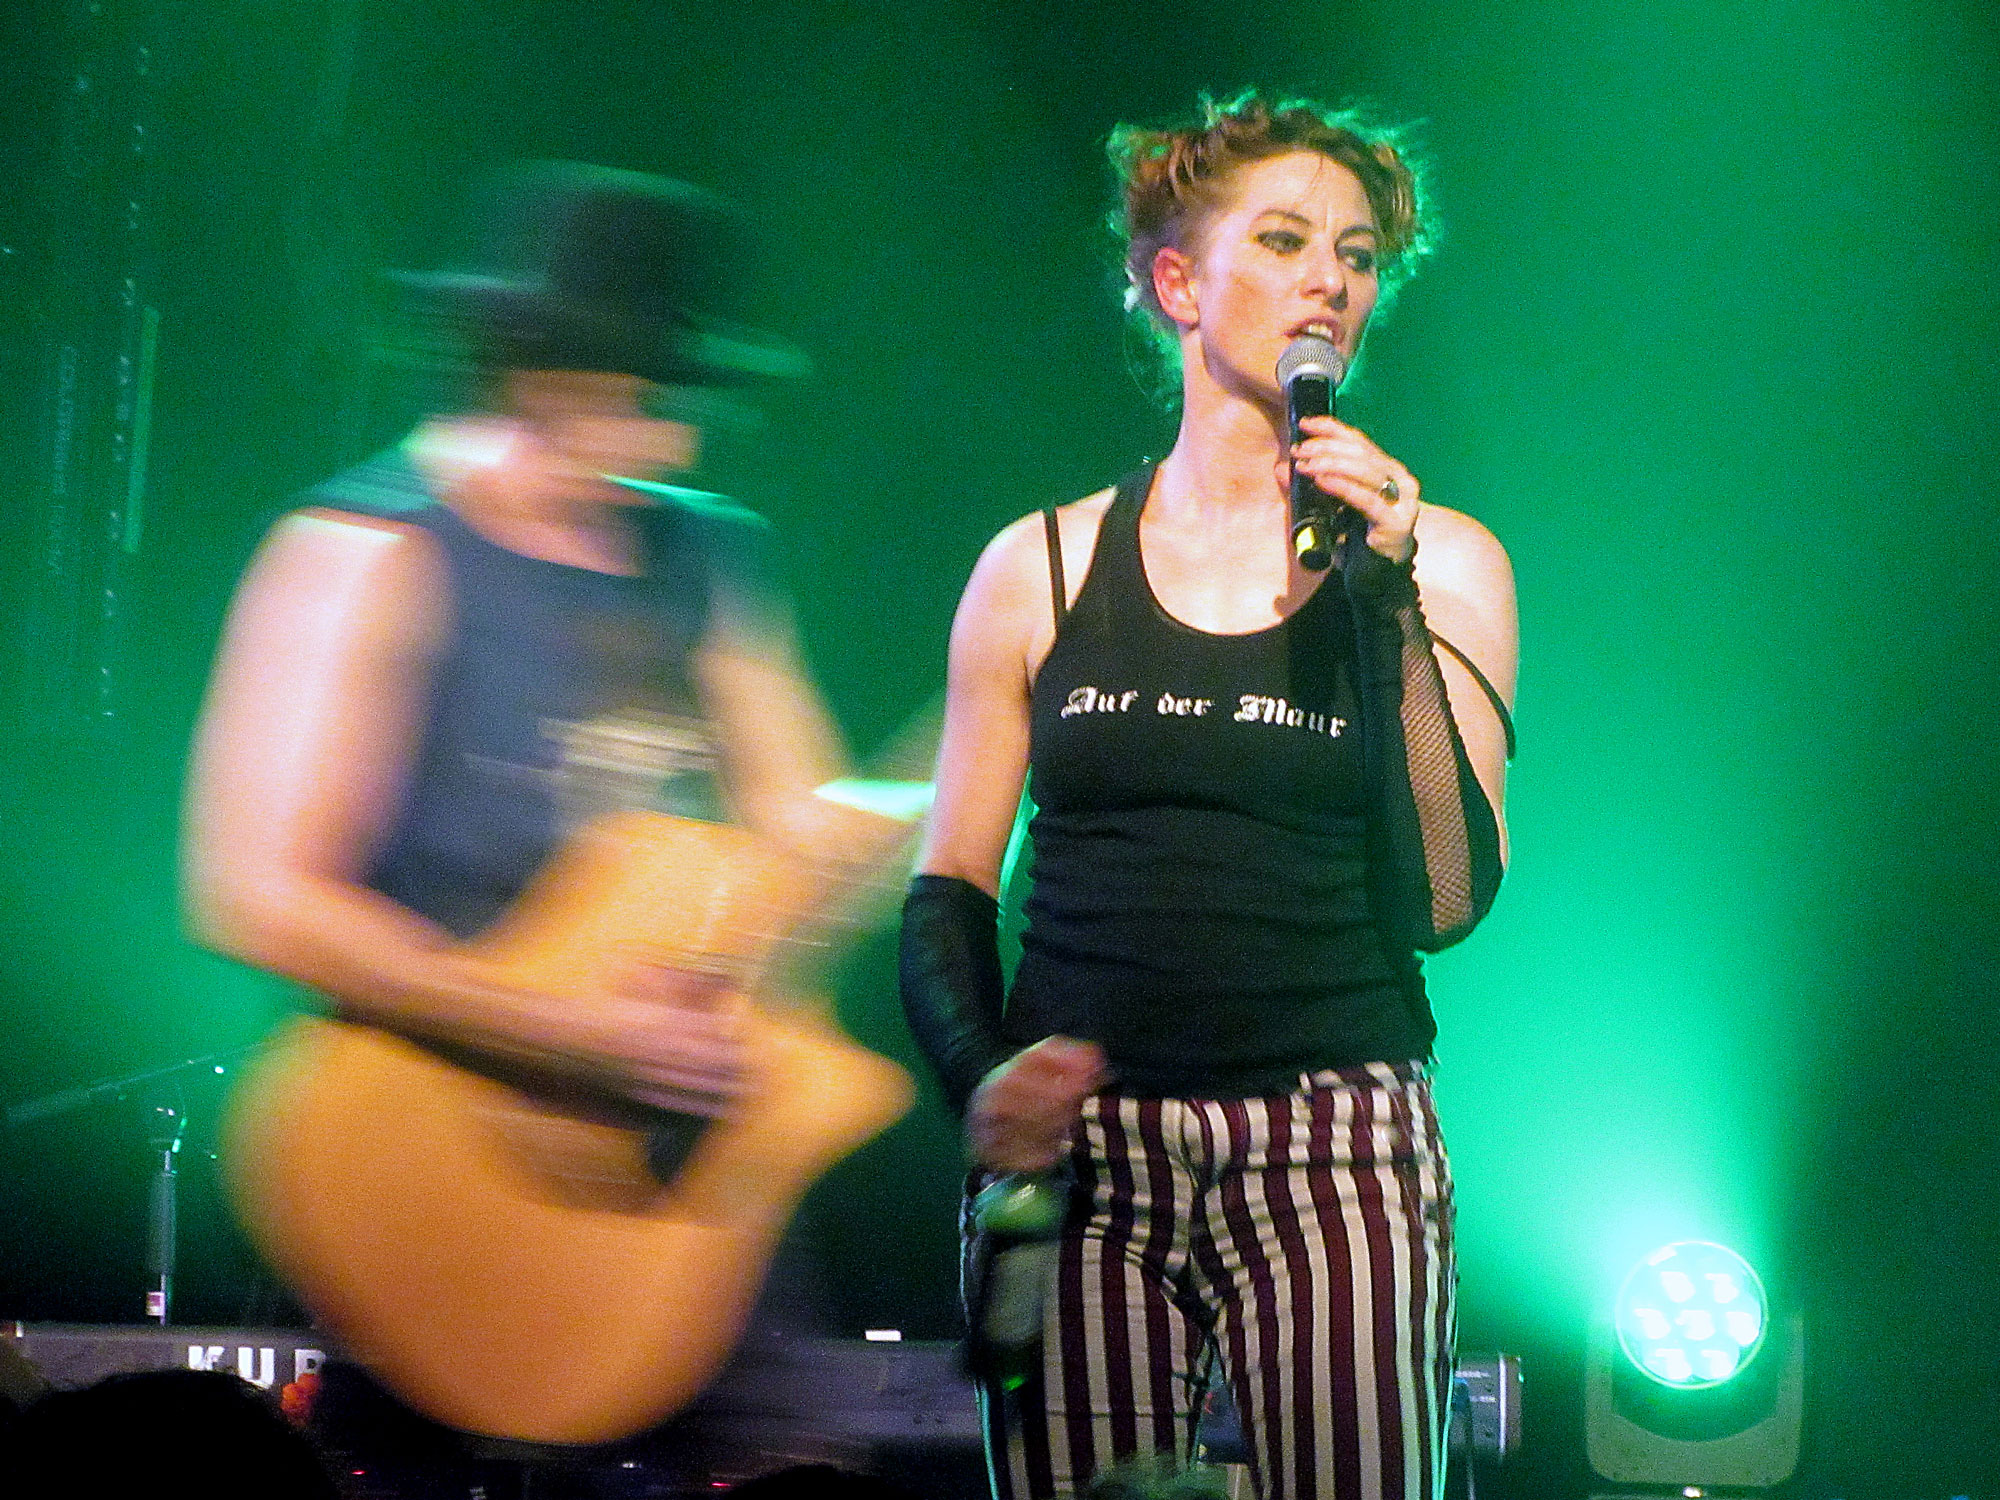 On a green-lit stage, stands a woman dressed in a black vest and stripy trousers. In one hand she holds a microphone, in the other a bottle of beer. Behind her, the blurred figure of a man playing acoustic guitar. He wears a bowler hat.